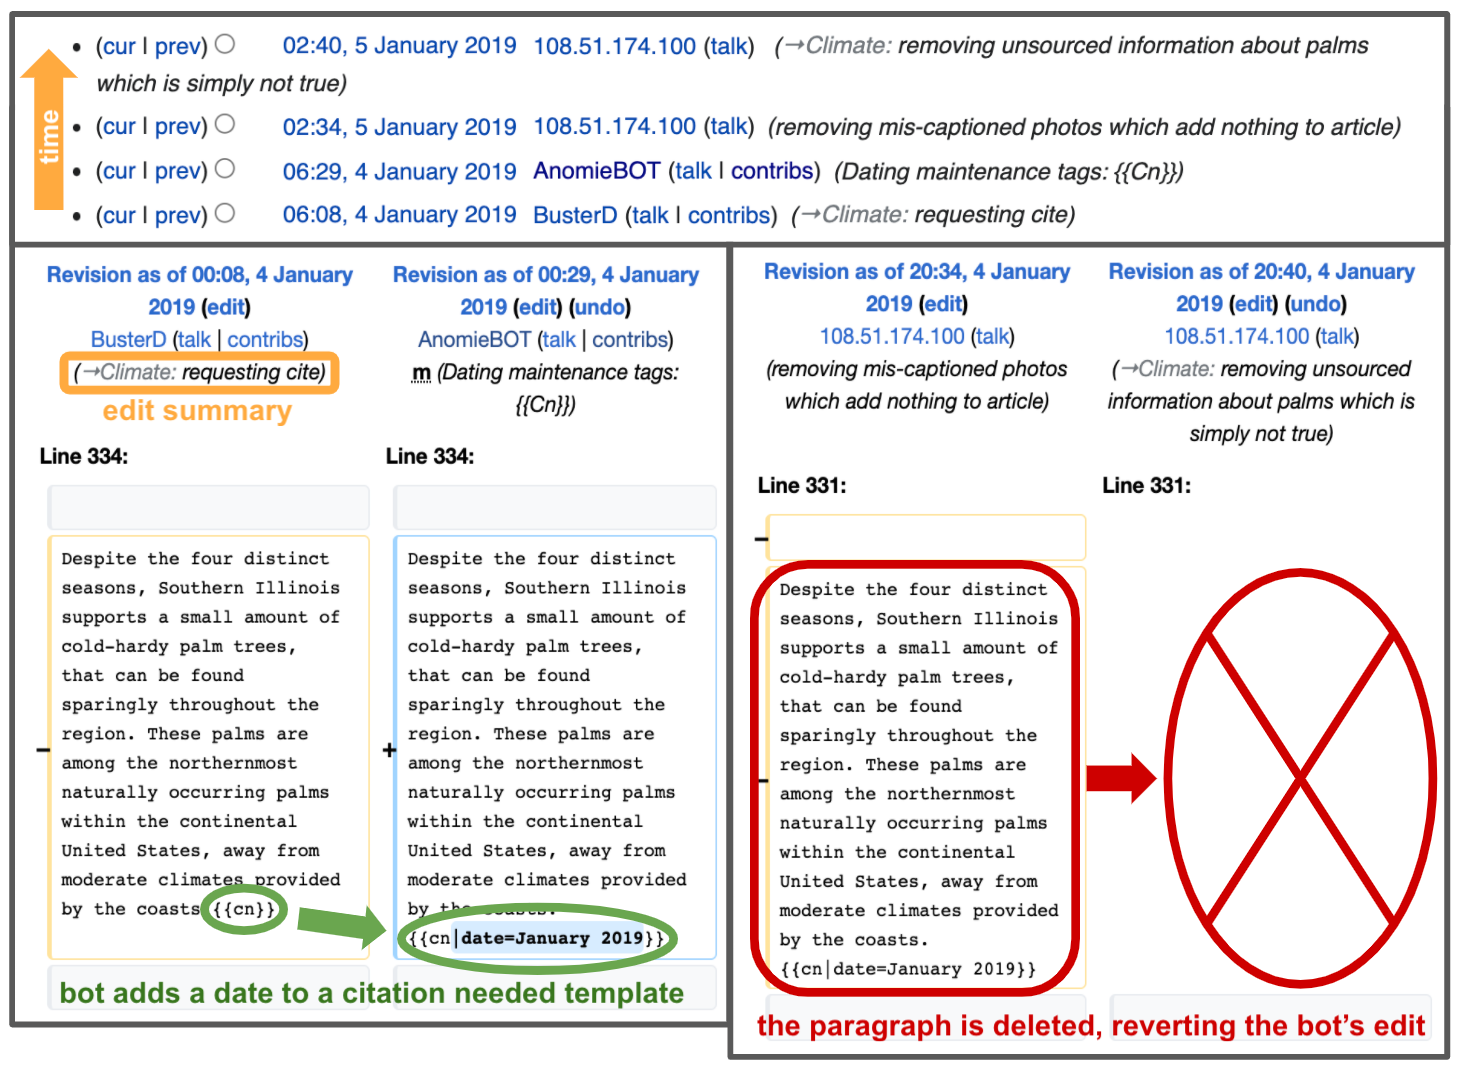 Diff view on WIkipedia, showing two edits involving bots. In the first, a bod adds a date to a citation needed template. In the second, the paragraph the bot edited is deleted, reverting the bot's edit.